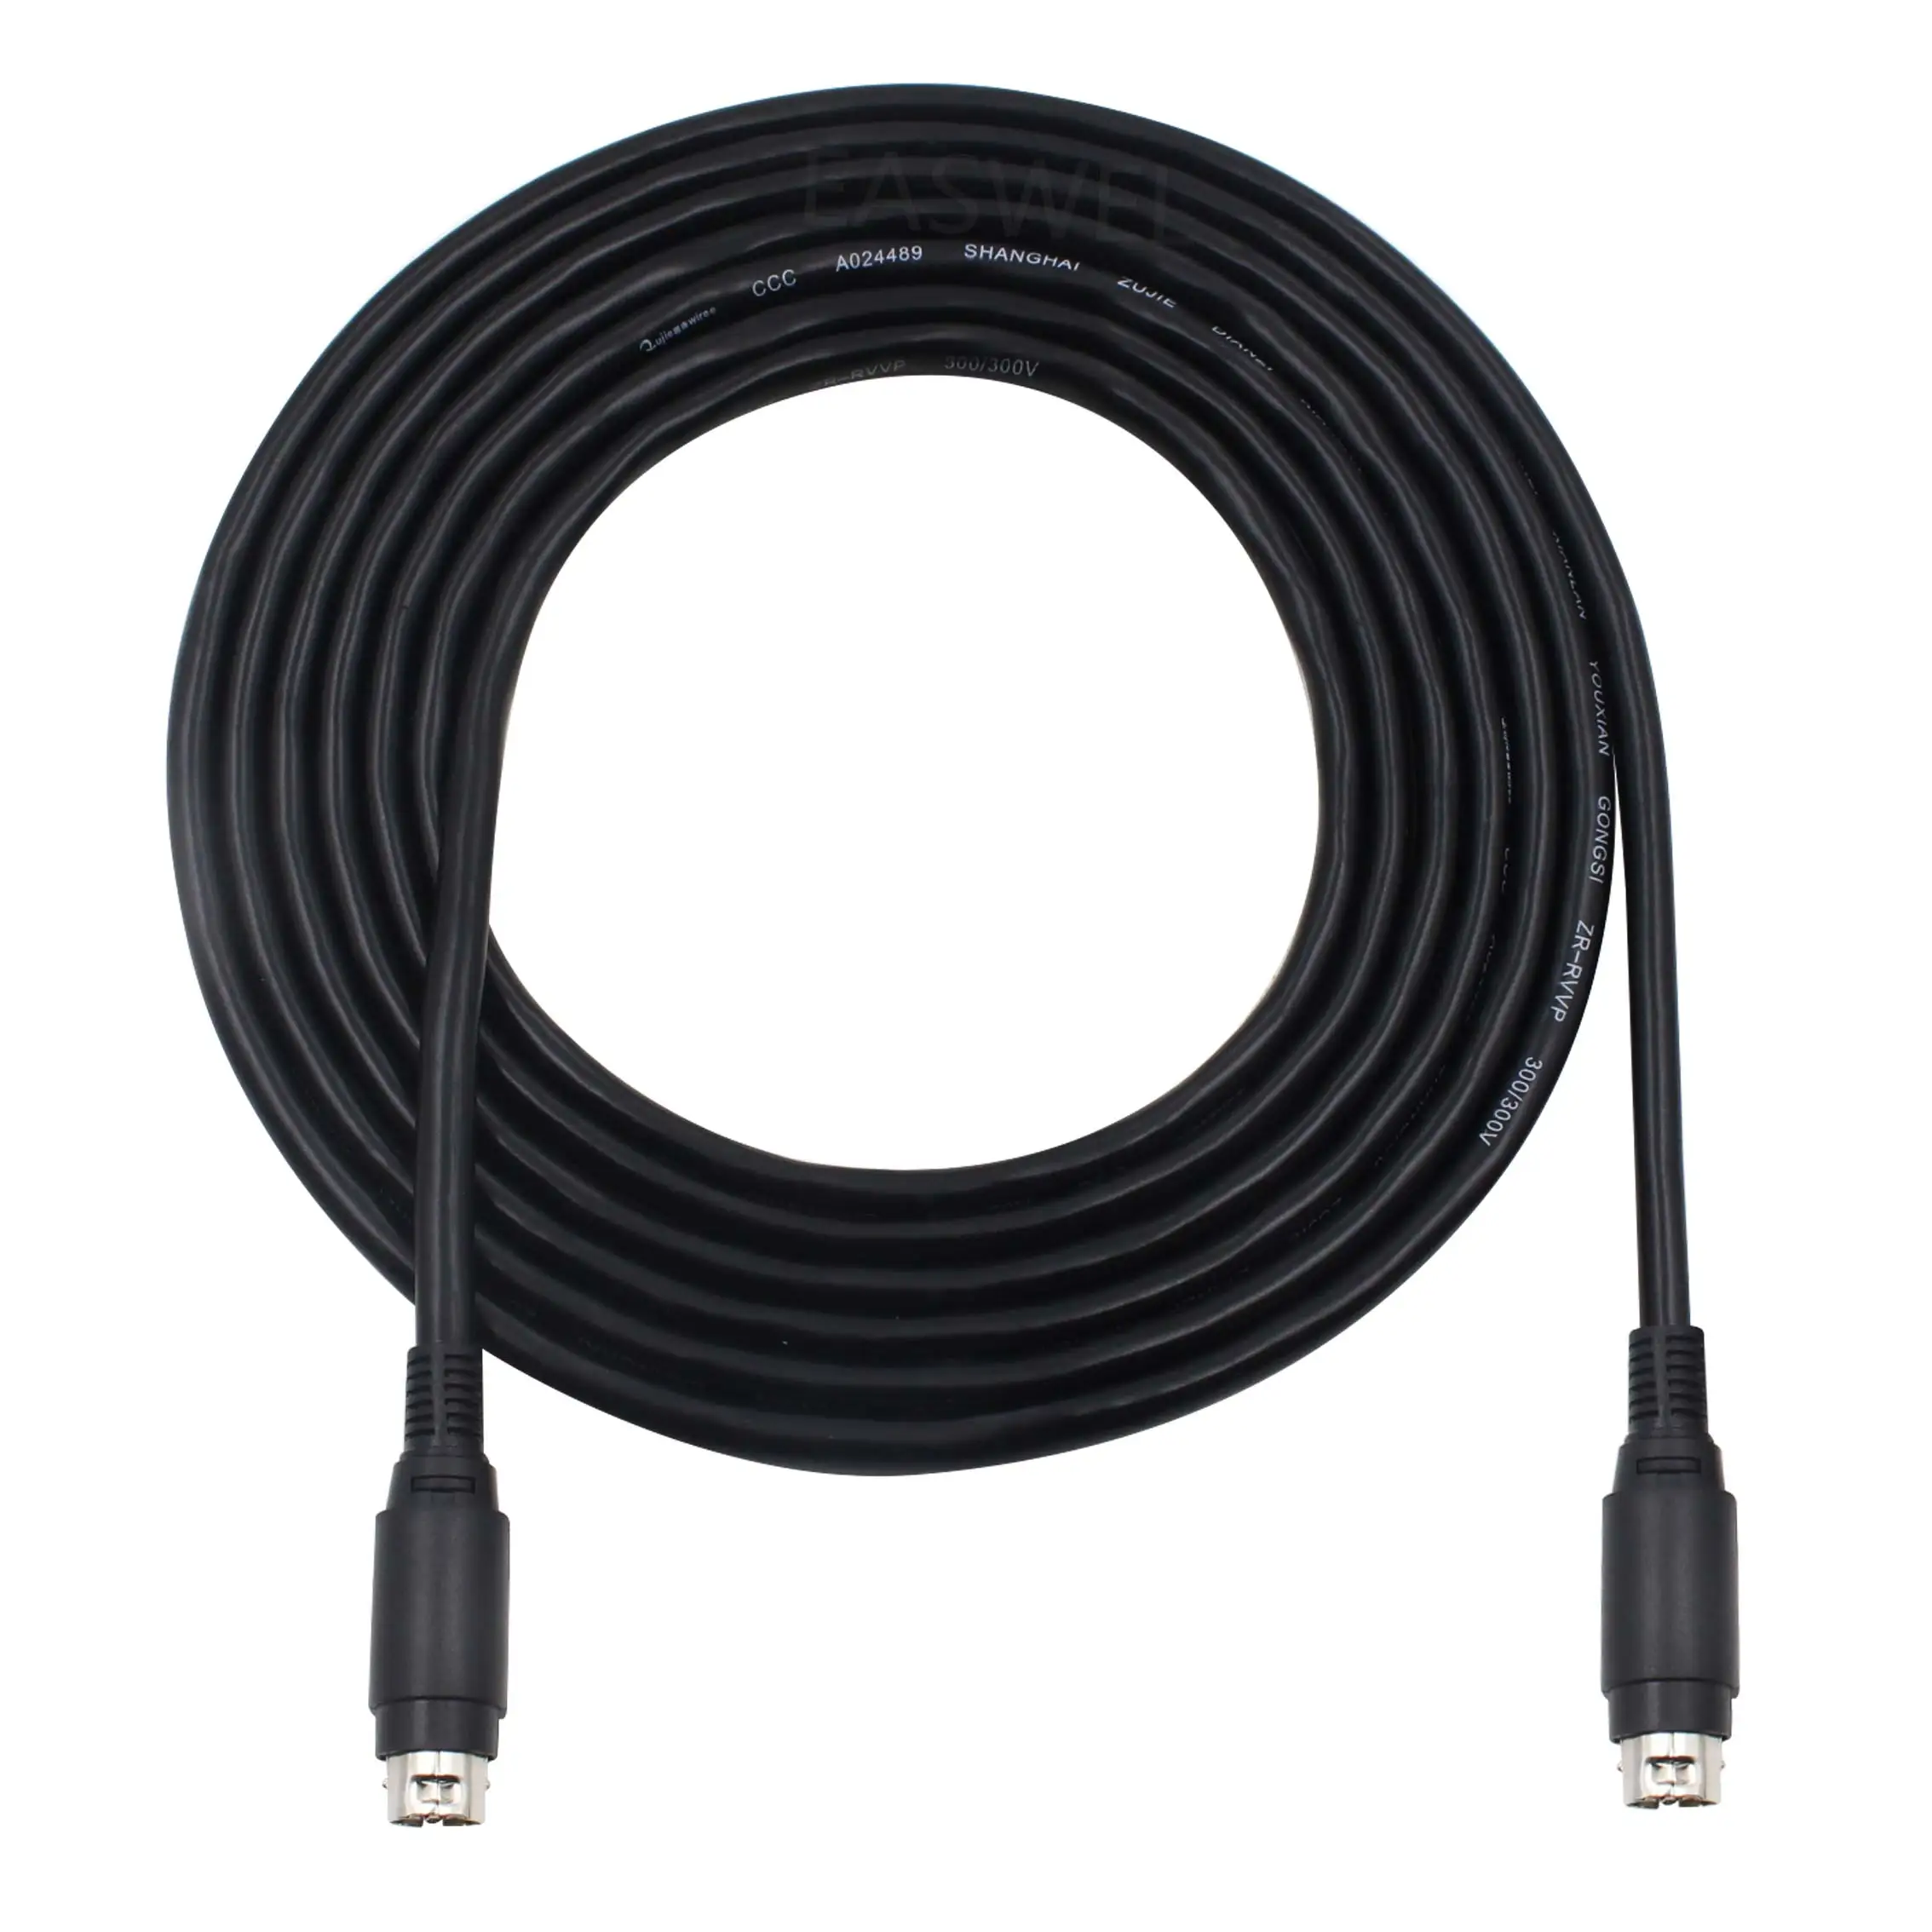 3M 9.8 ft 4 Pin Speaker Cable for D-bt Edifier R1700BT R1600TIII Swans D1010 Headunit Auxiiliary Connector